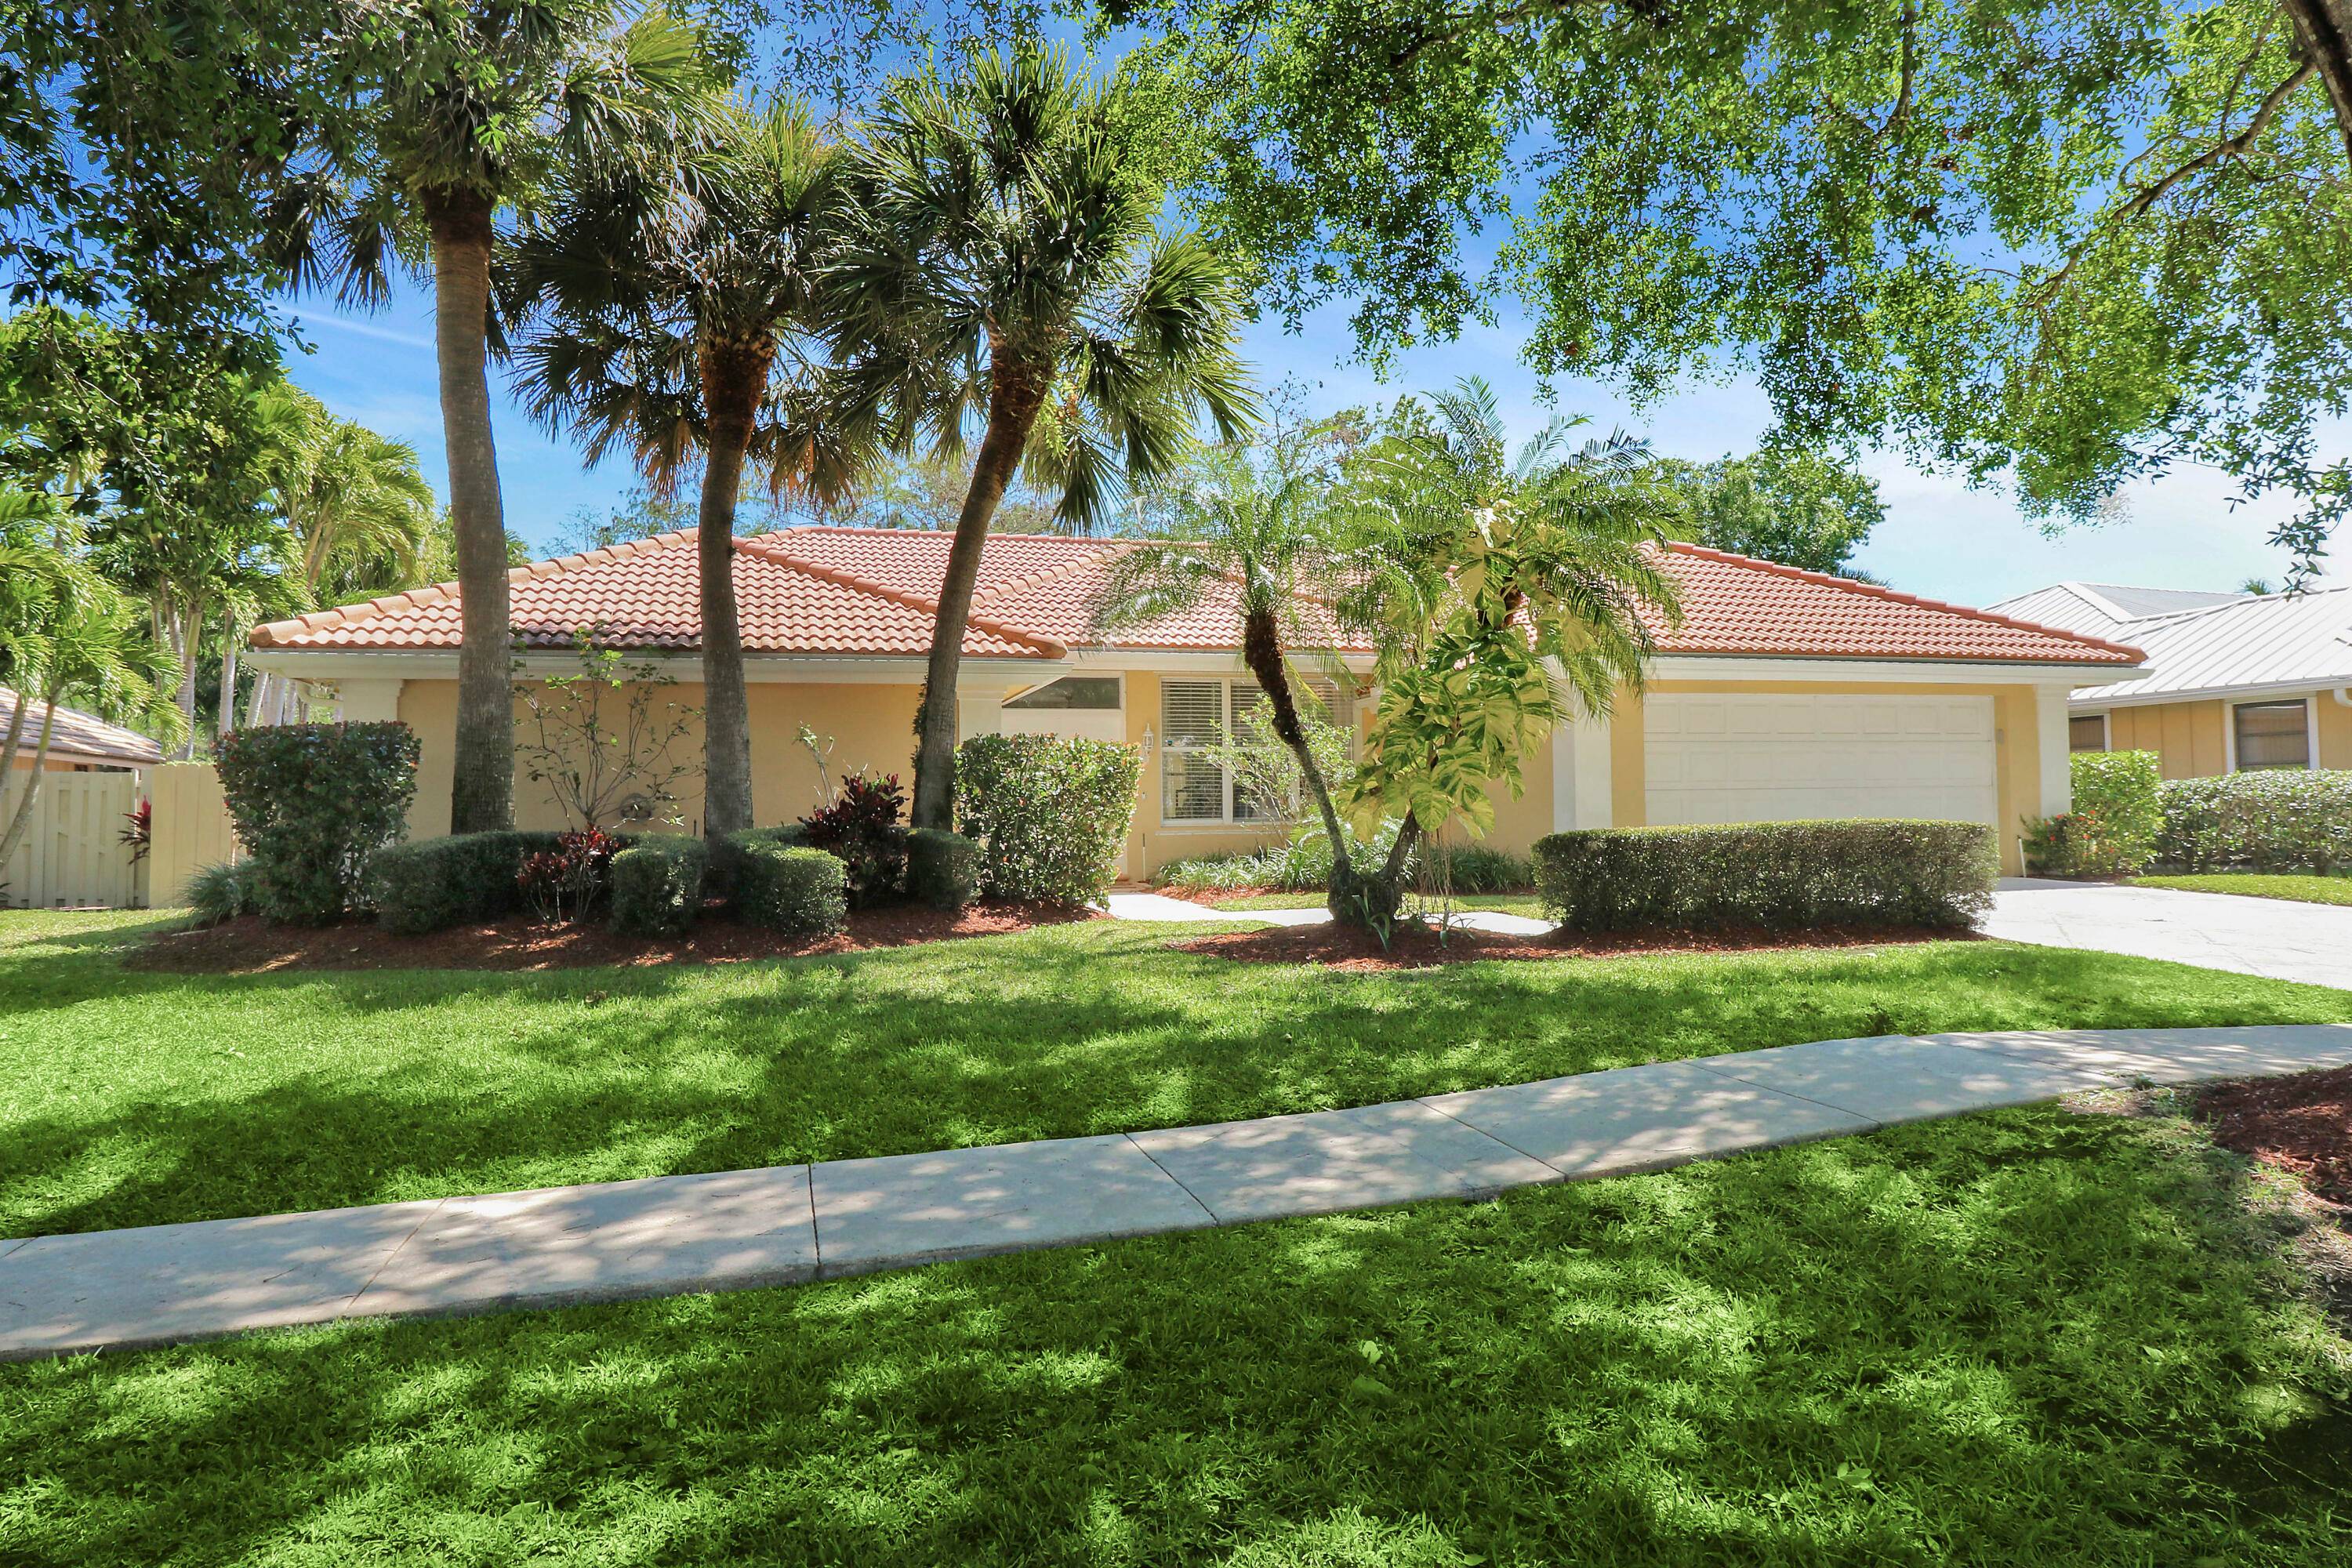 Come see this charming 4 bedroom 3 bath CBS home in the Shores neighborhood in Jupiter featuring a huge freeform heated salt chlorinated swimming pool and spa situated on a ...